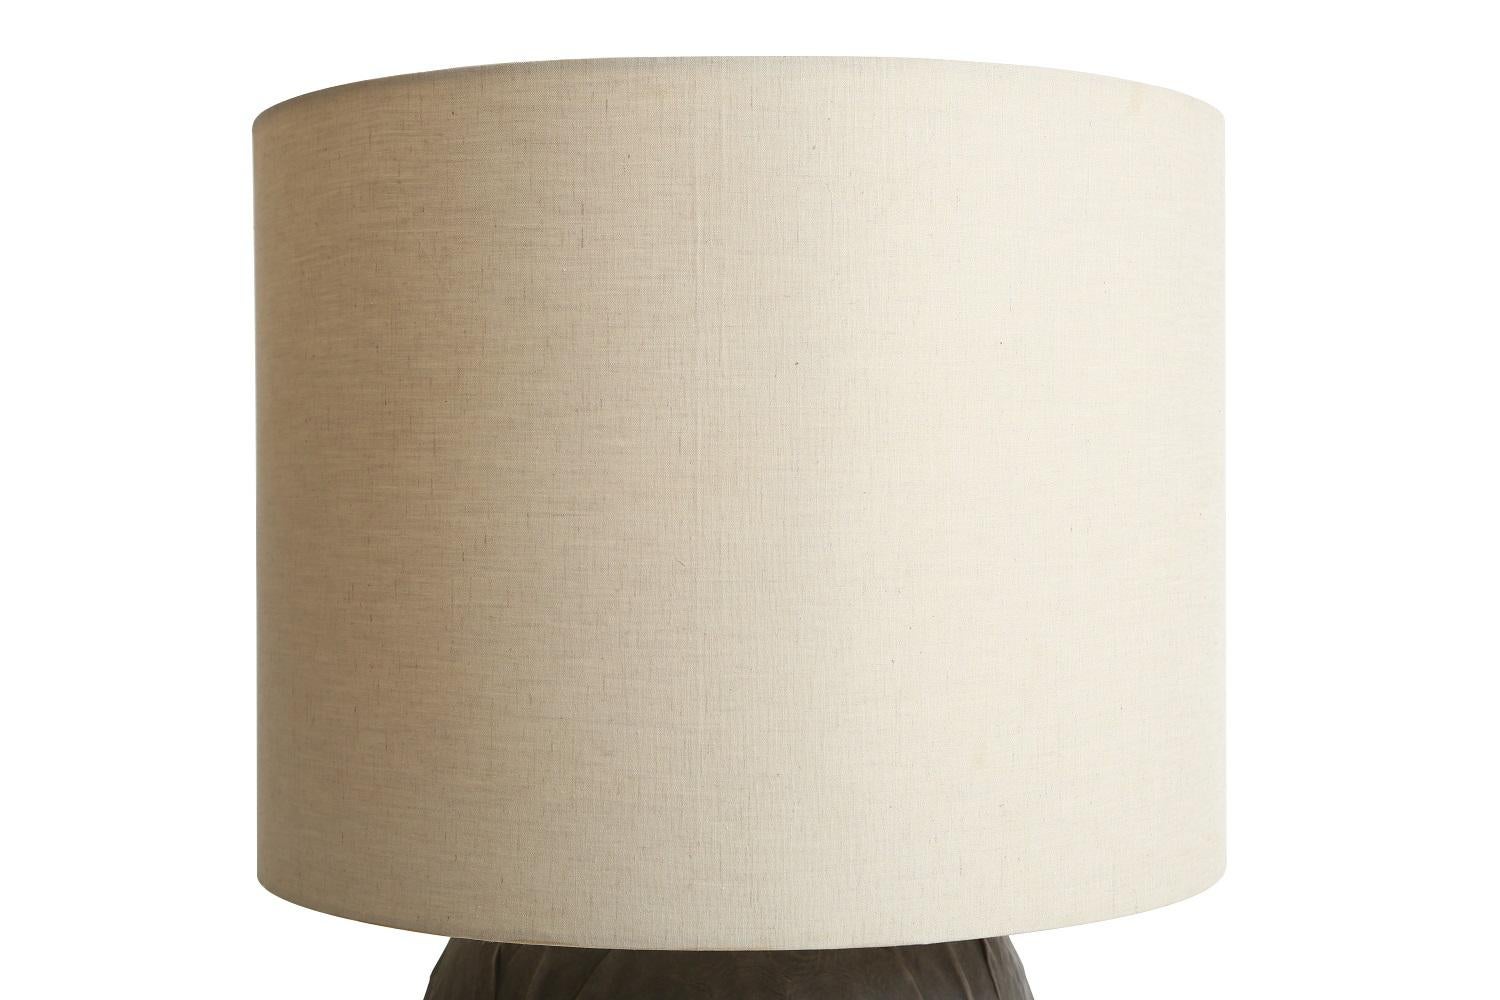 Turtle molded ceramic round table lamp base with cotton chambray shade, made in Paris by Giles Caffier.

Dimensions:

Base: 11